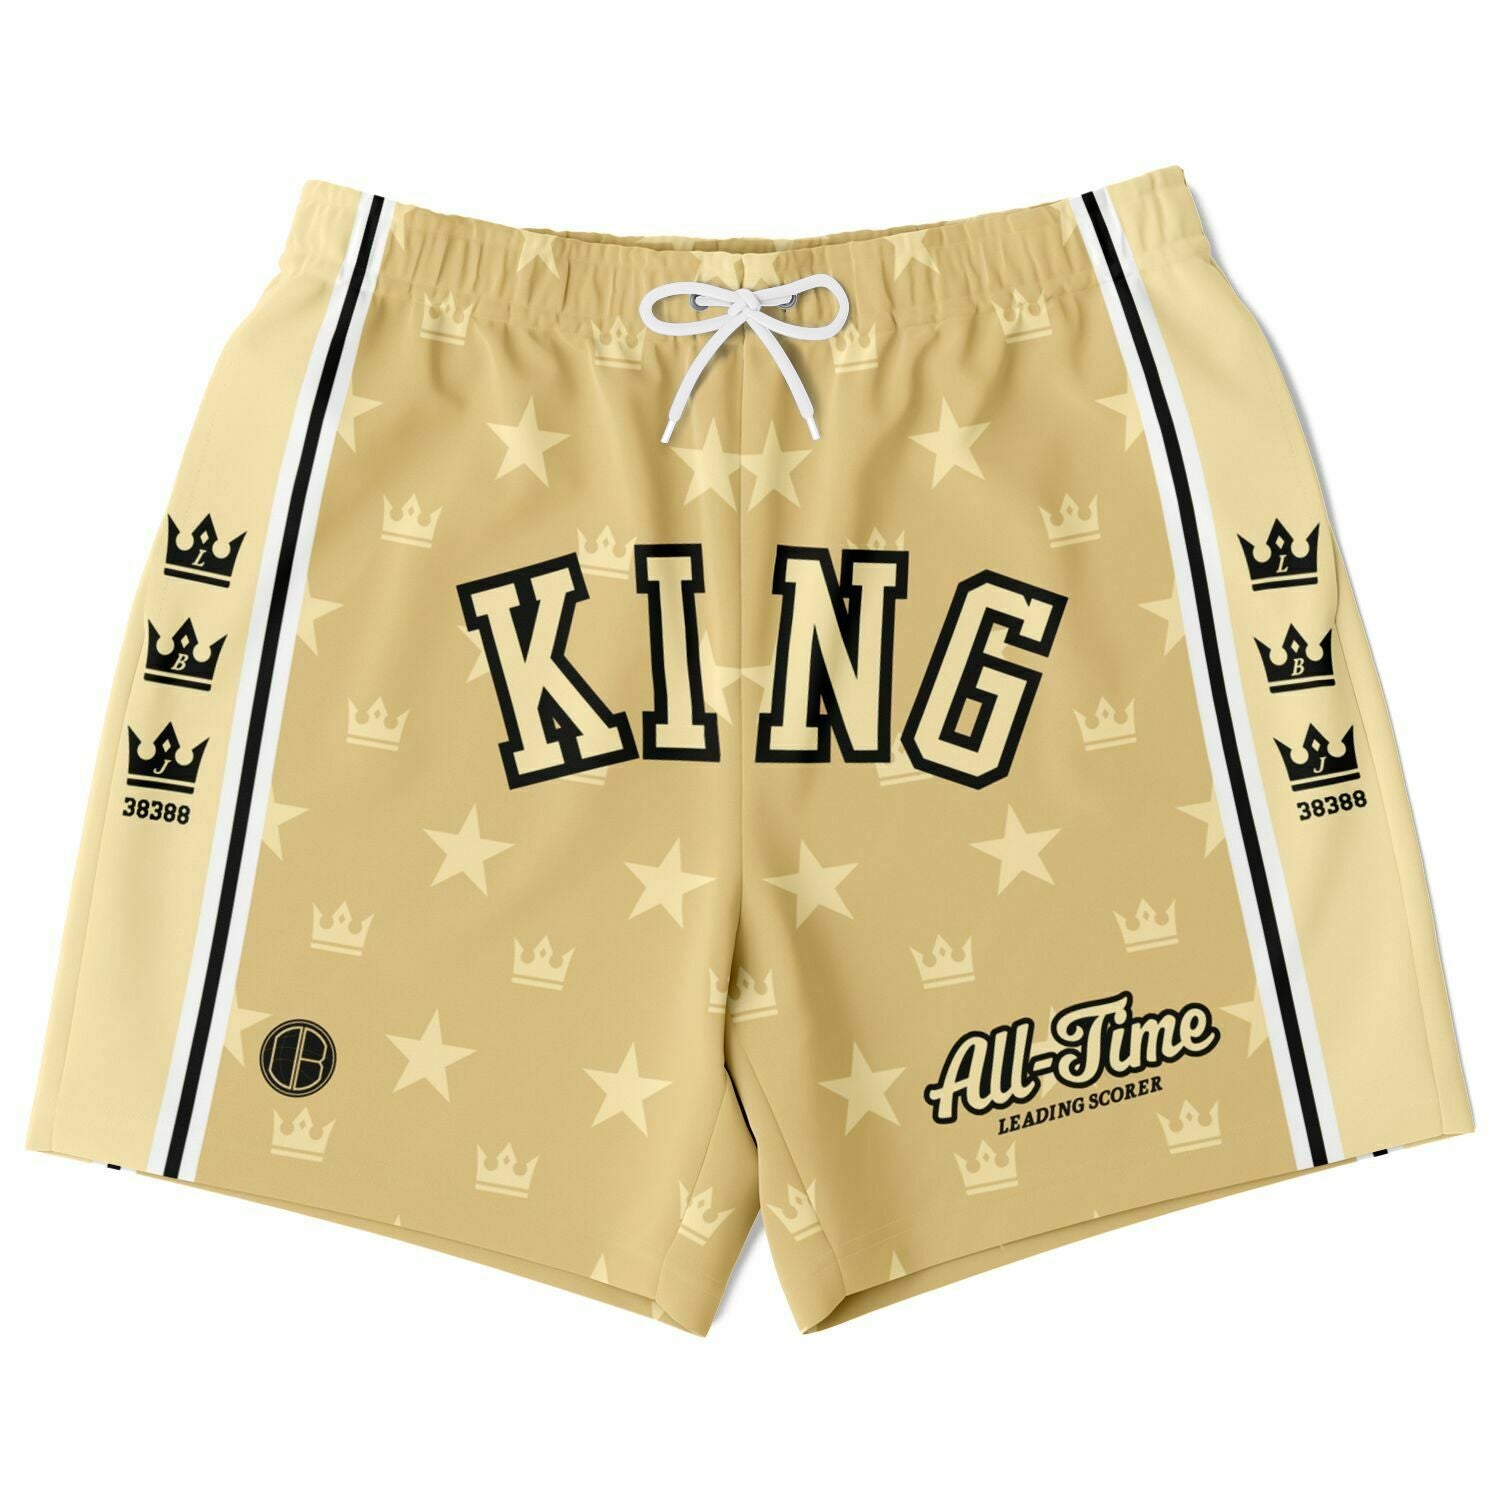 Short-Lebron-James-Los-Angeles-Lakers-Dearbball-clothes-brand-france